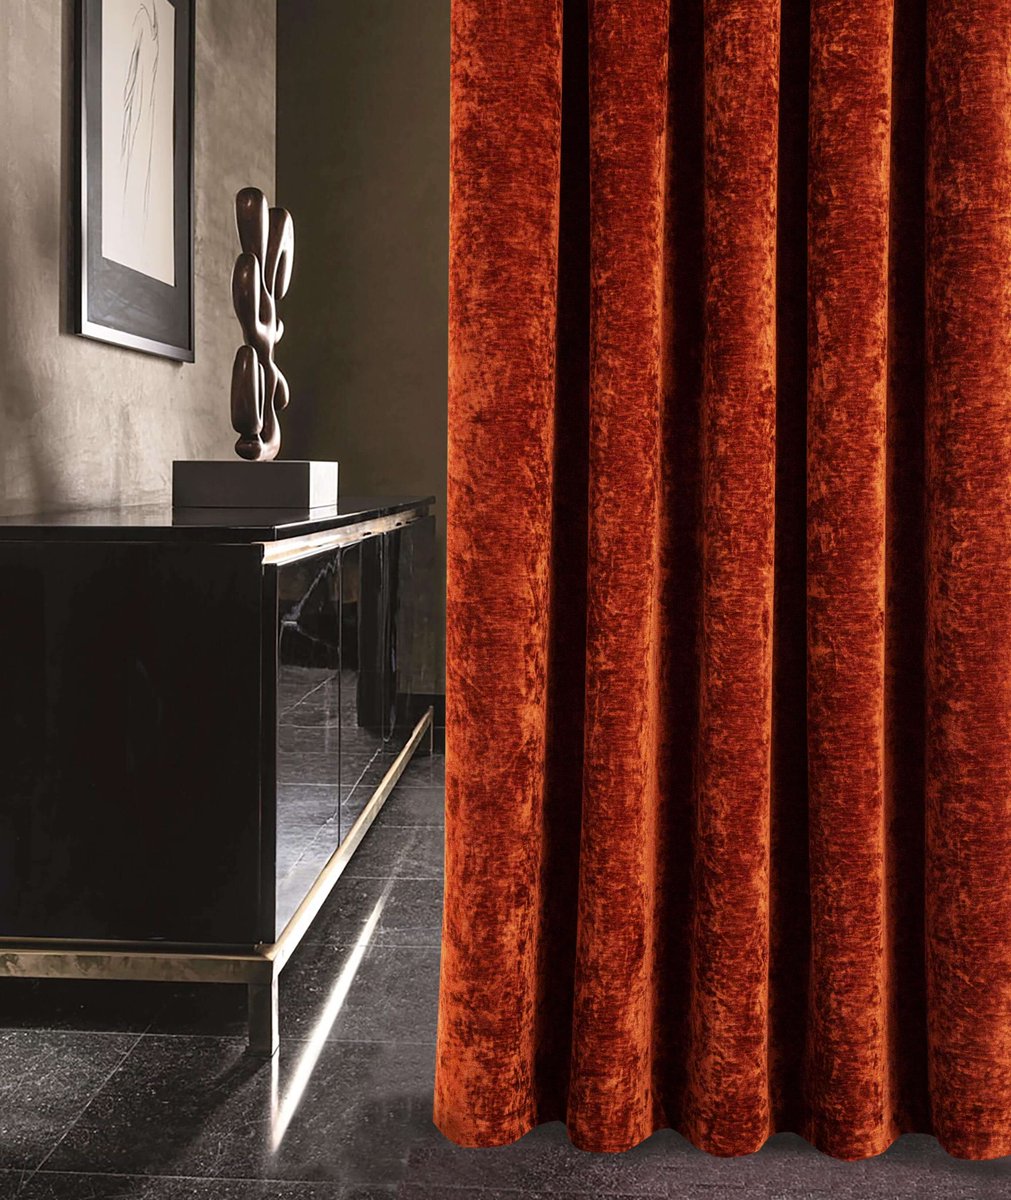 Camden soft crushed chenille heavyweight curtains, available in terracotta, chocolate, or natural. ow.ly/Cbsr50R3YVU

#heavyweight #crushed #chenille #fully #lined #blackout #thermal #natural #terracotta #chocolate #themillshopnottingham #homedecor